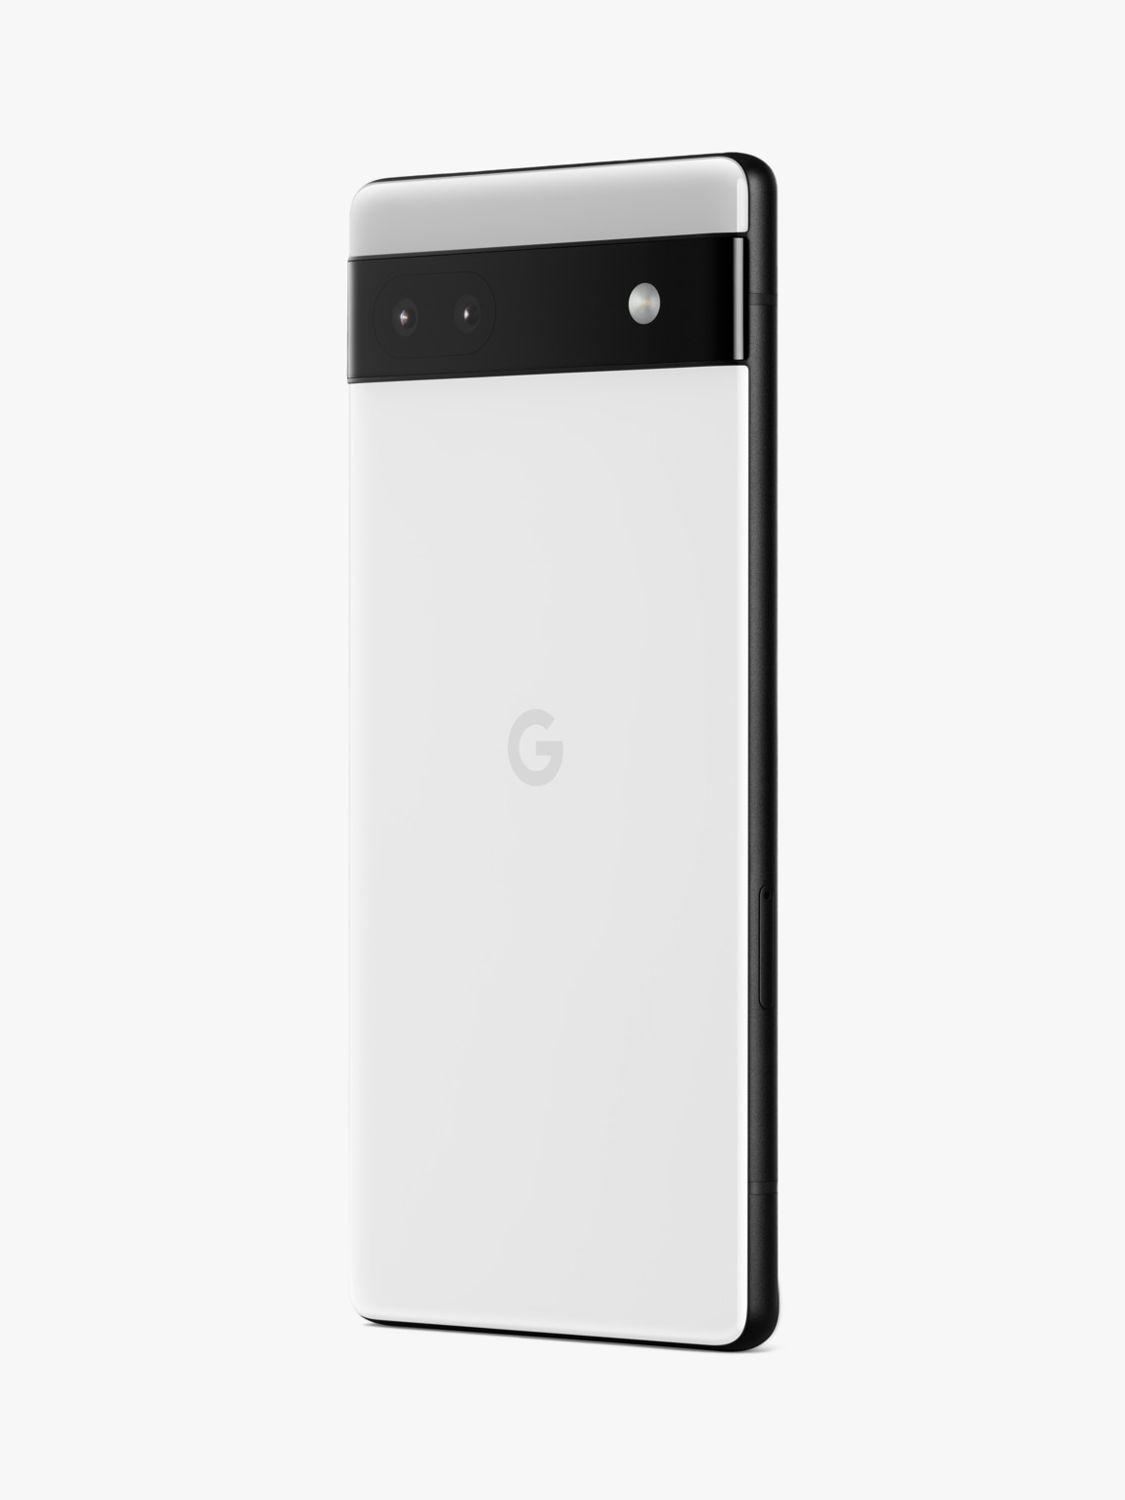 Google Pixel 6a Smartphone, Android, 6.1”, 5G, SIM Free, 128GB